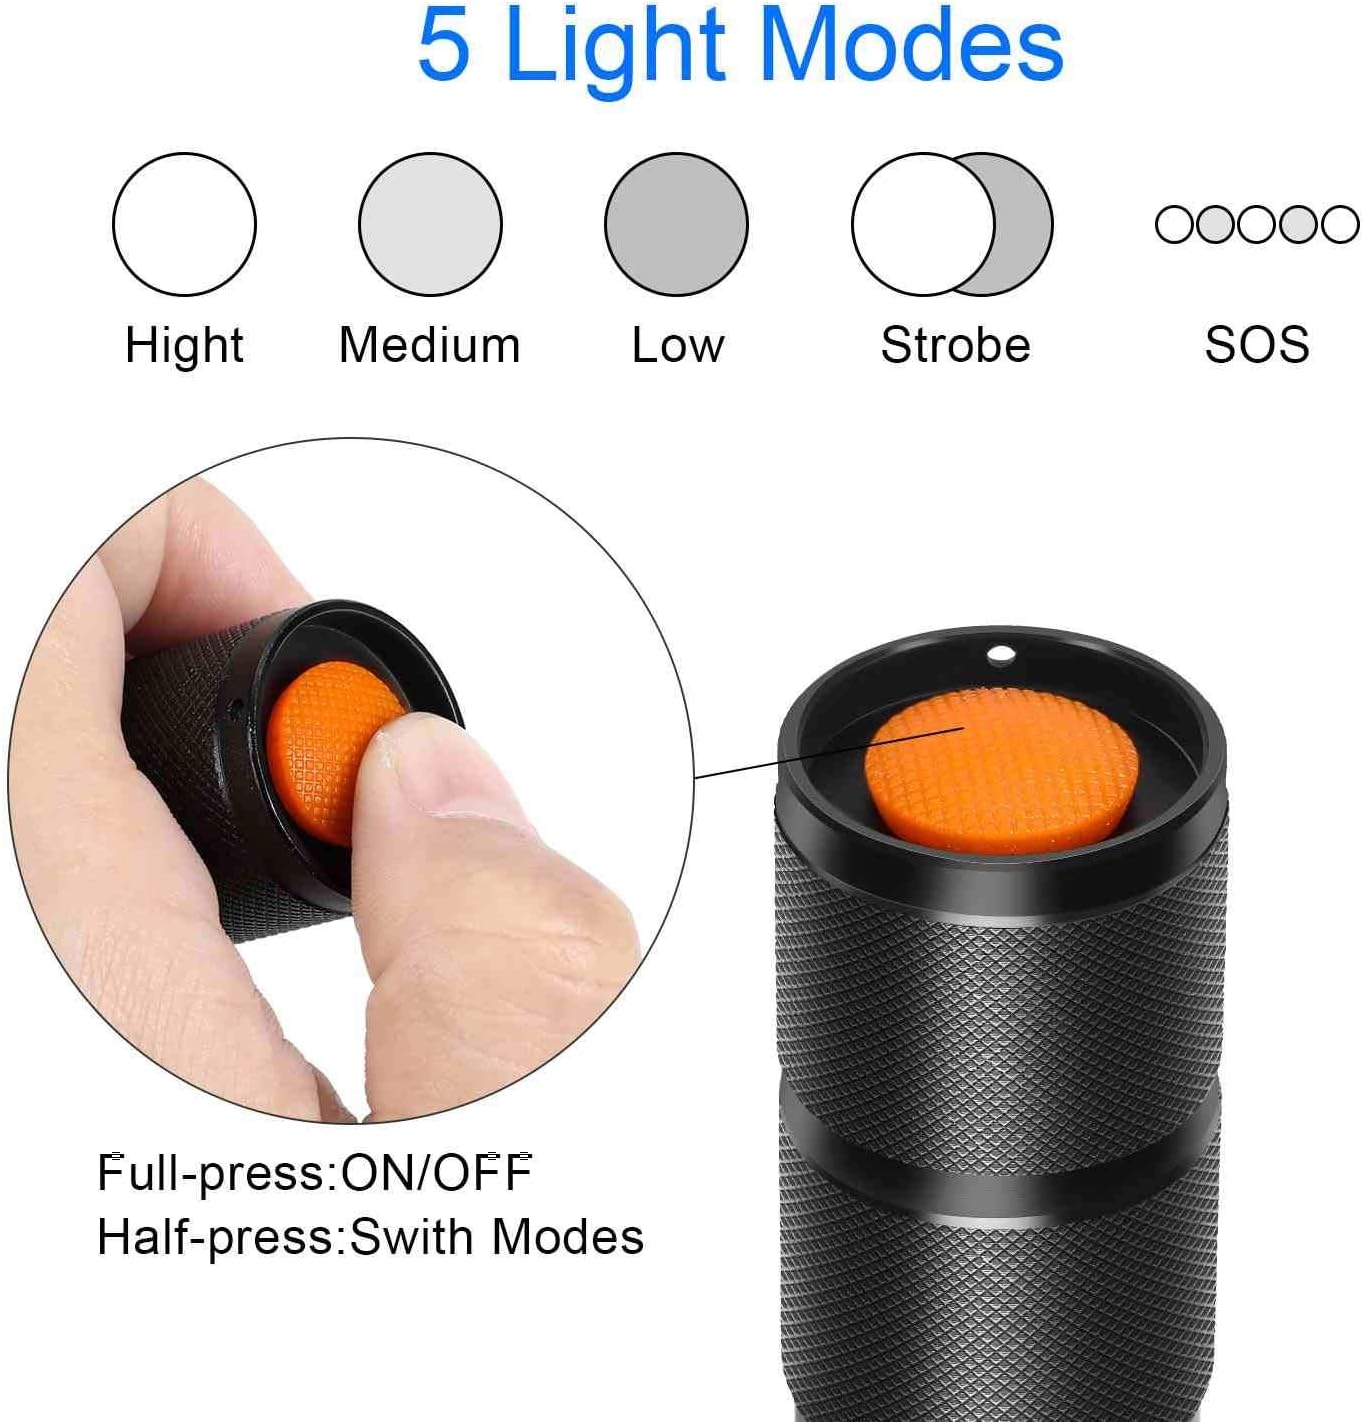 Gaslen LED Tactical Flashlight - High Lumen Rechargeable Water Resistant Torch Light, Zoomable, Camping, Outdoor, Emergency, Everyday Flashlights with Clip